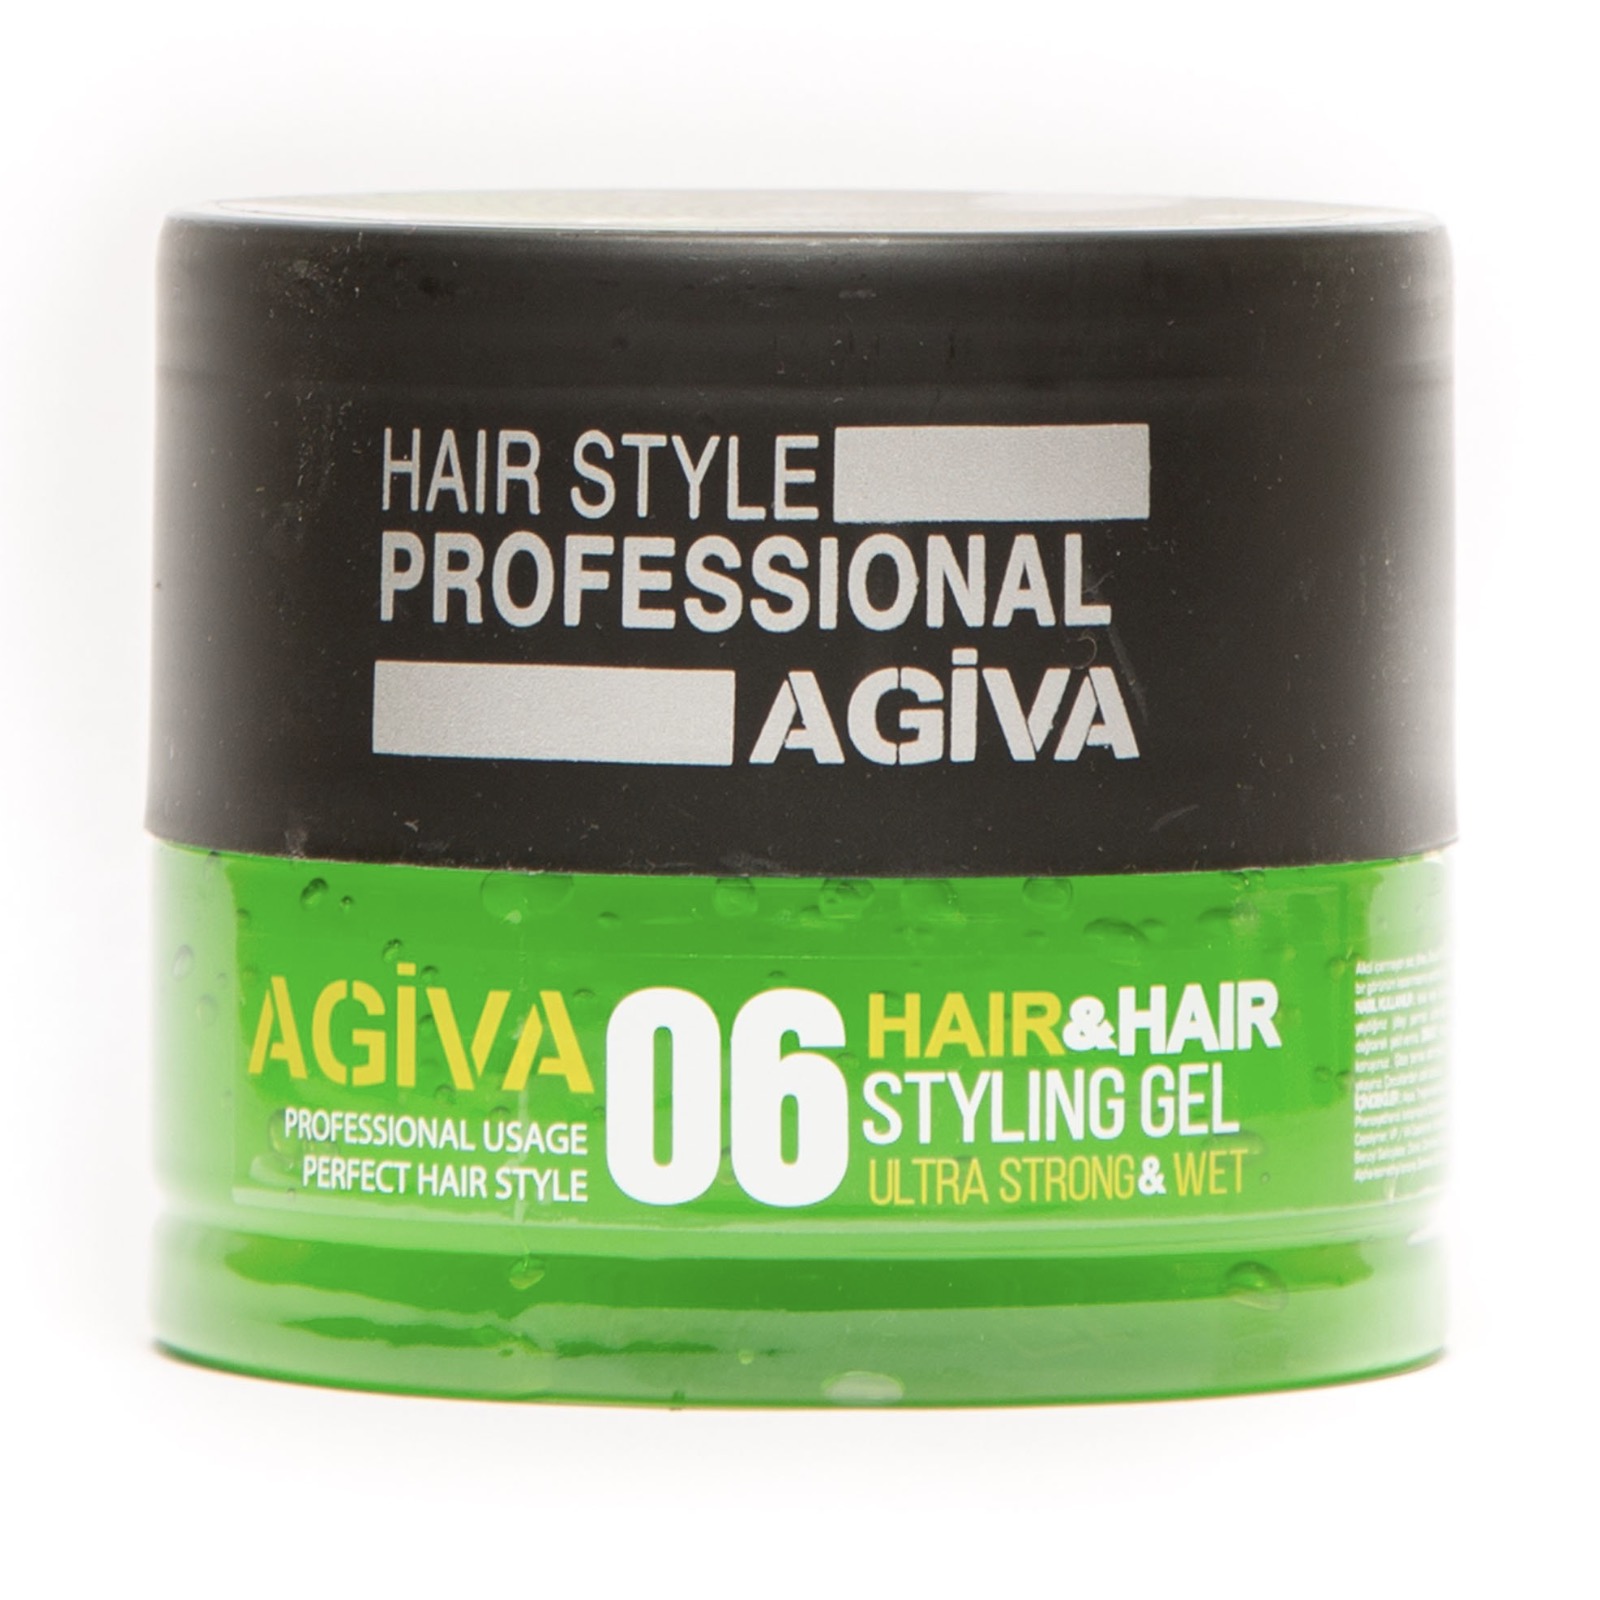 AGIVA Hair Styling Gel 06 Wet Look Ultra Strong Hold 700 ml